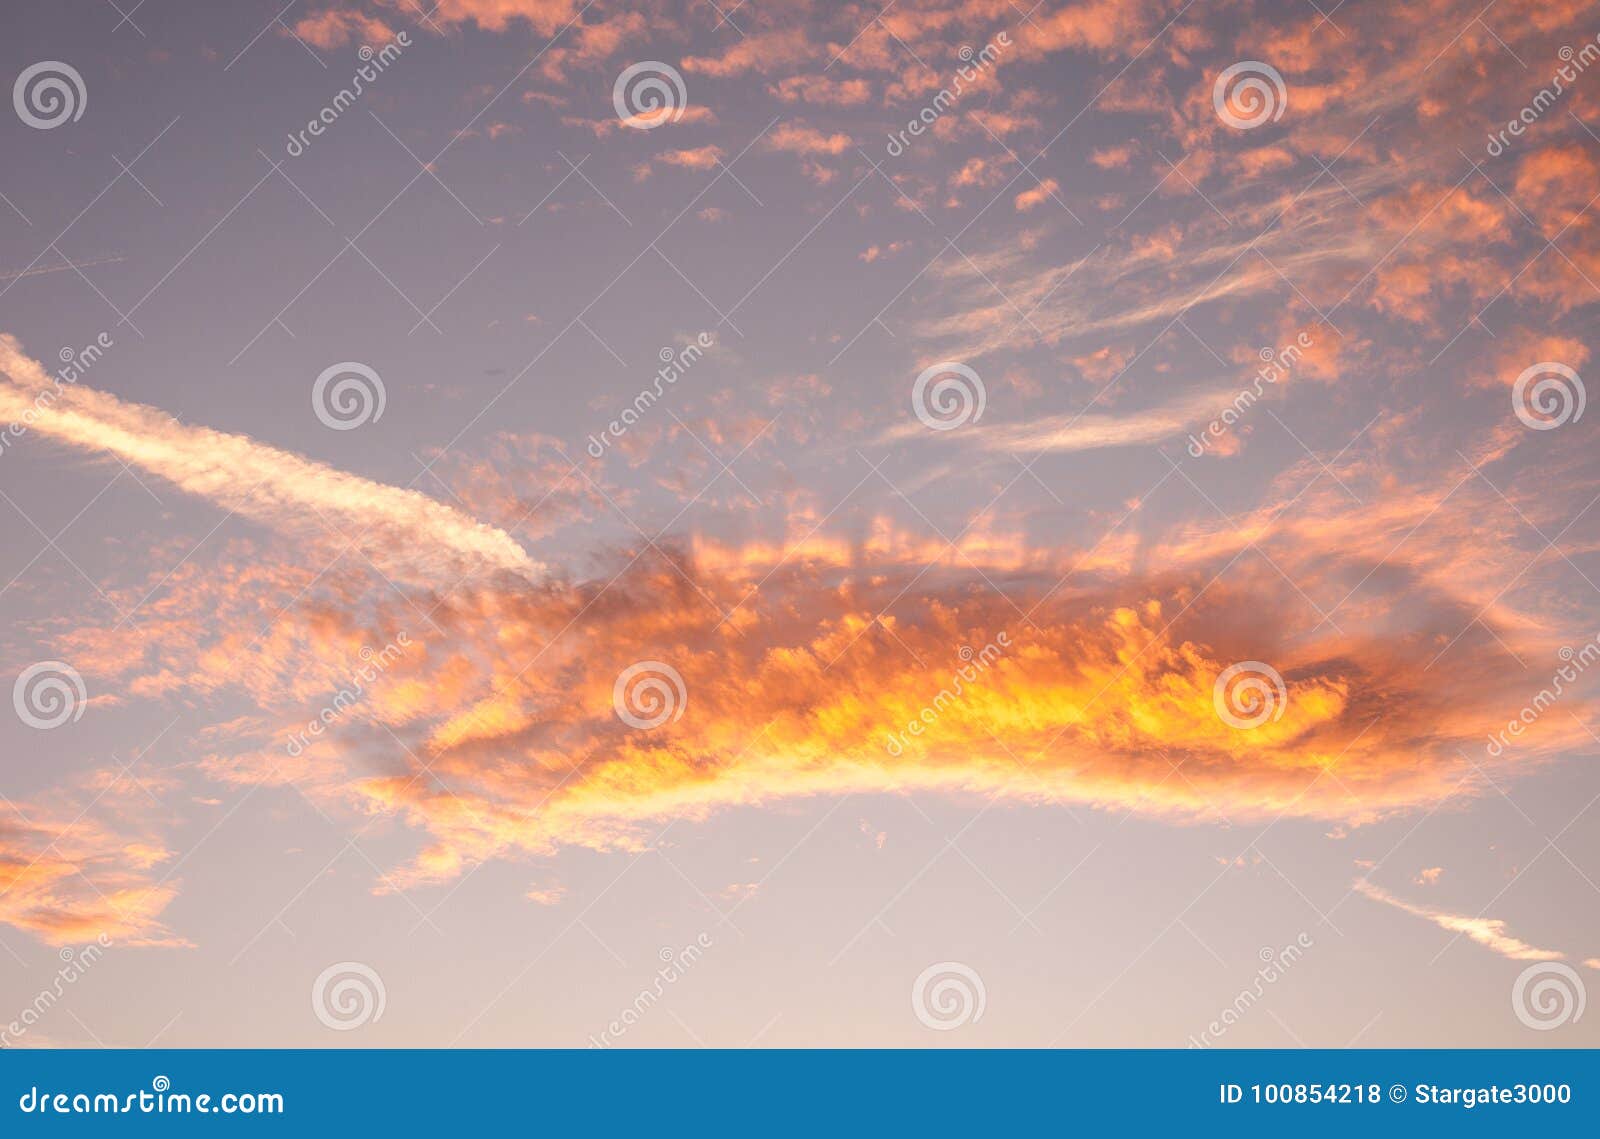 Altocumulus Clouds at Sunset. Stock Photo - Image of clouds, science ...